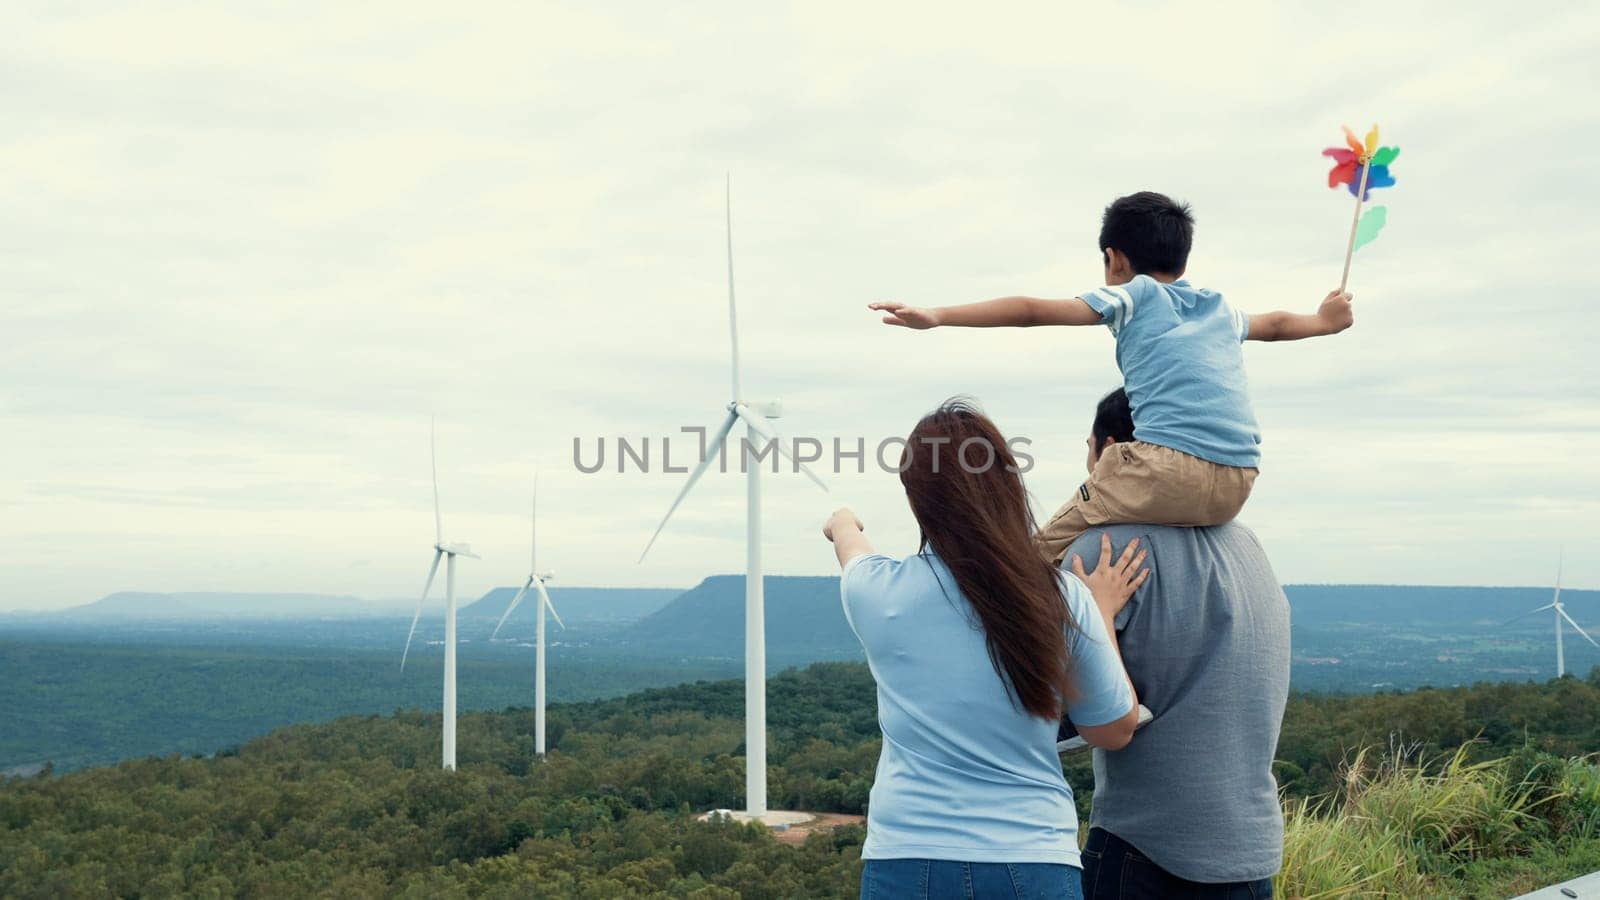 Concept of progressive happy family enjoying their time at the wind turbine farm. Electric generator from wind by wind turbine generator on the country side with hill and mountain on the horizon.